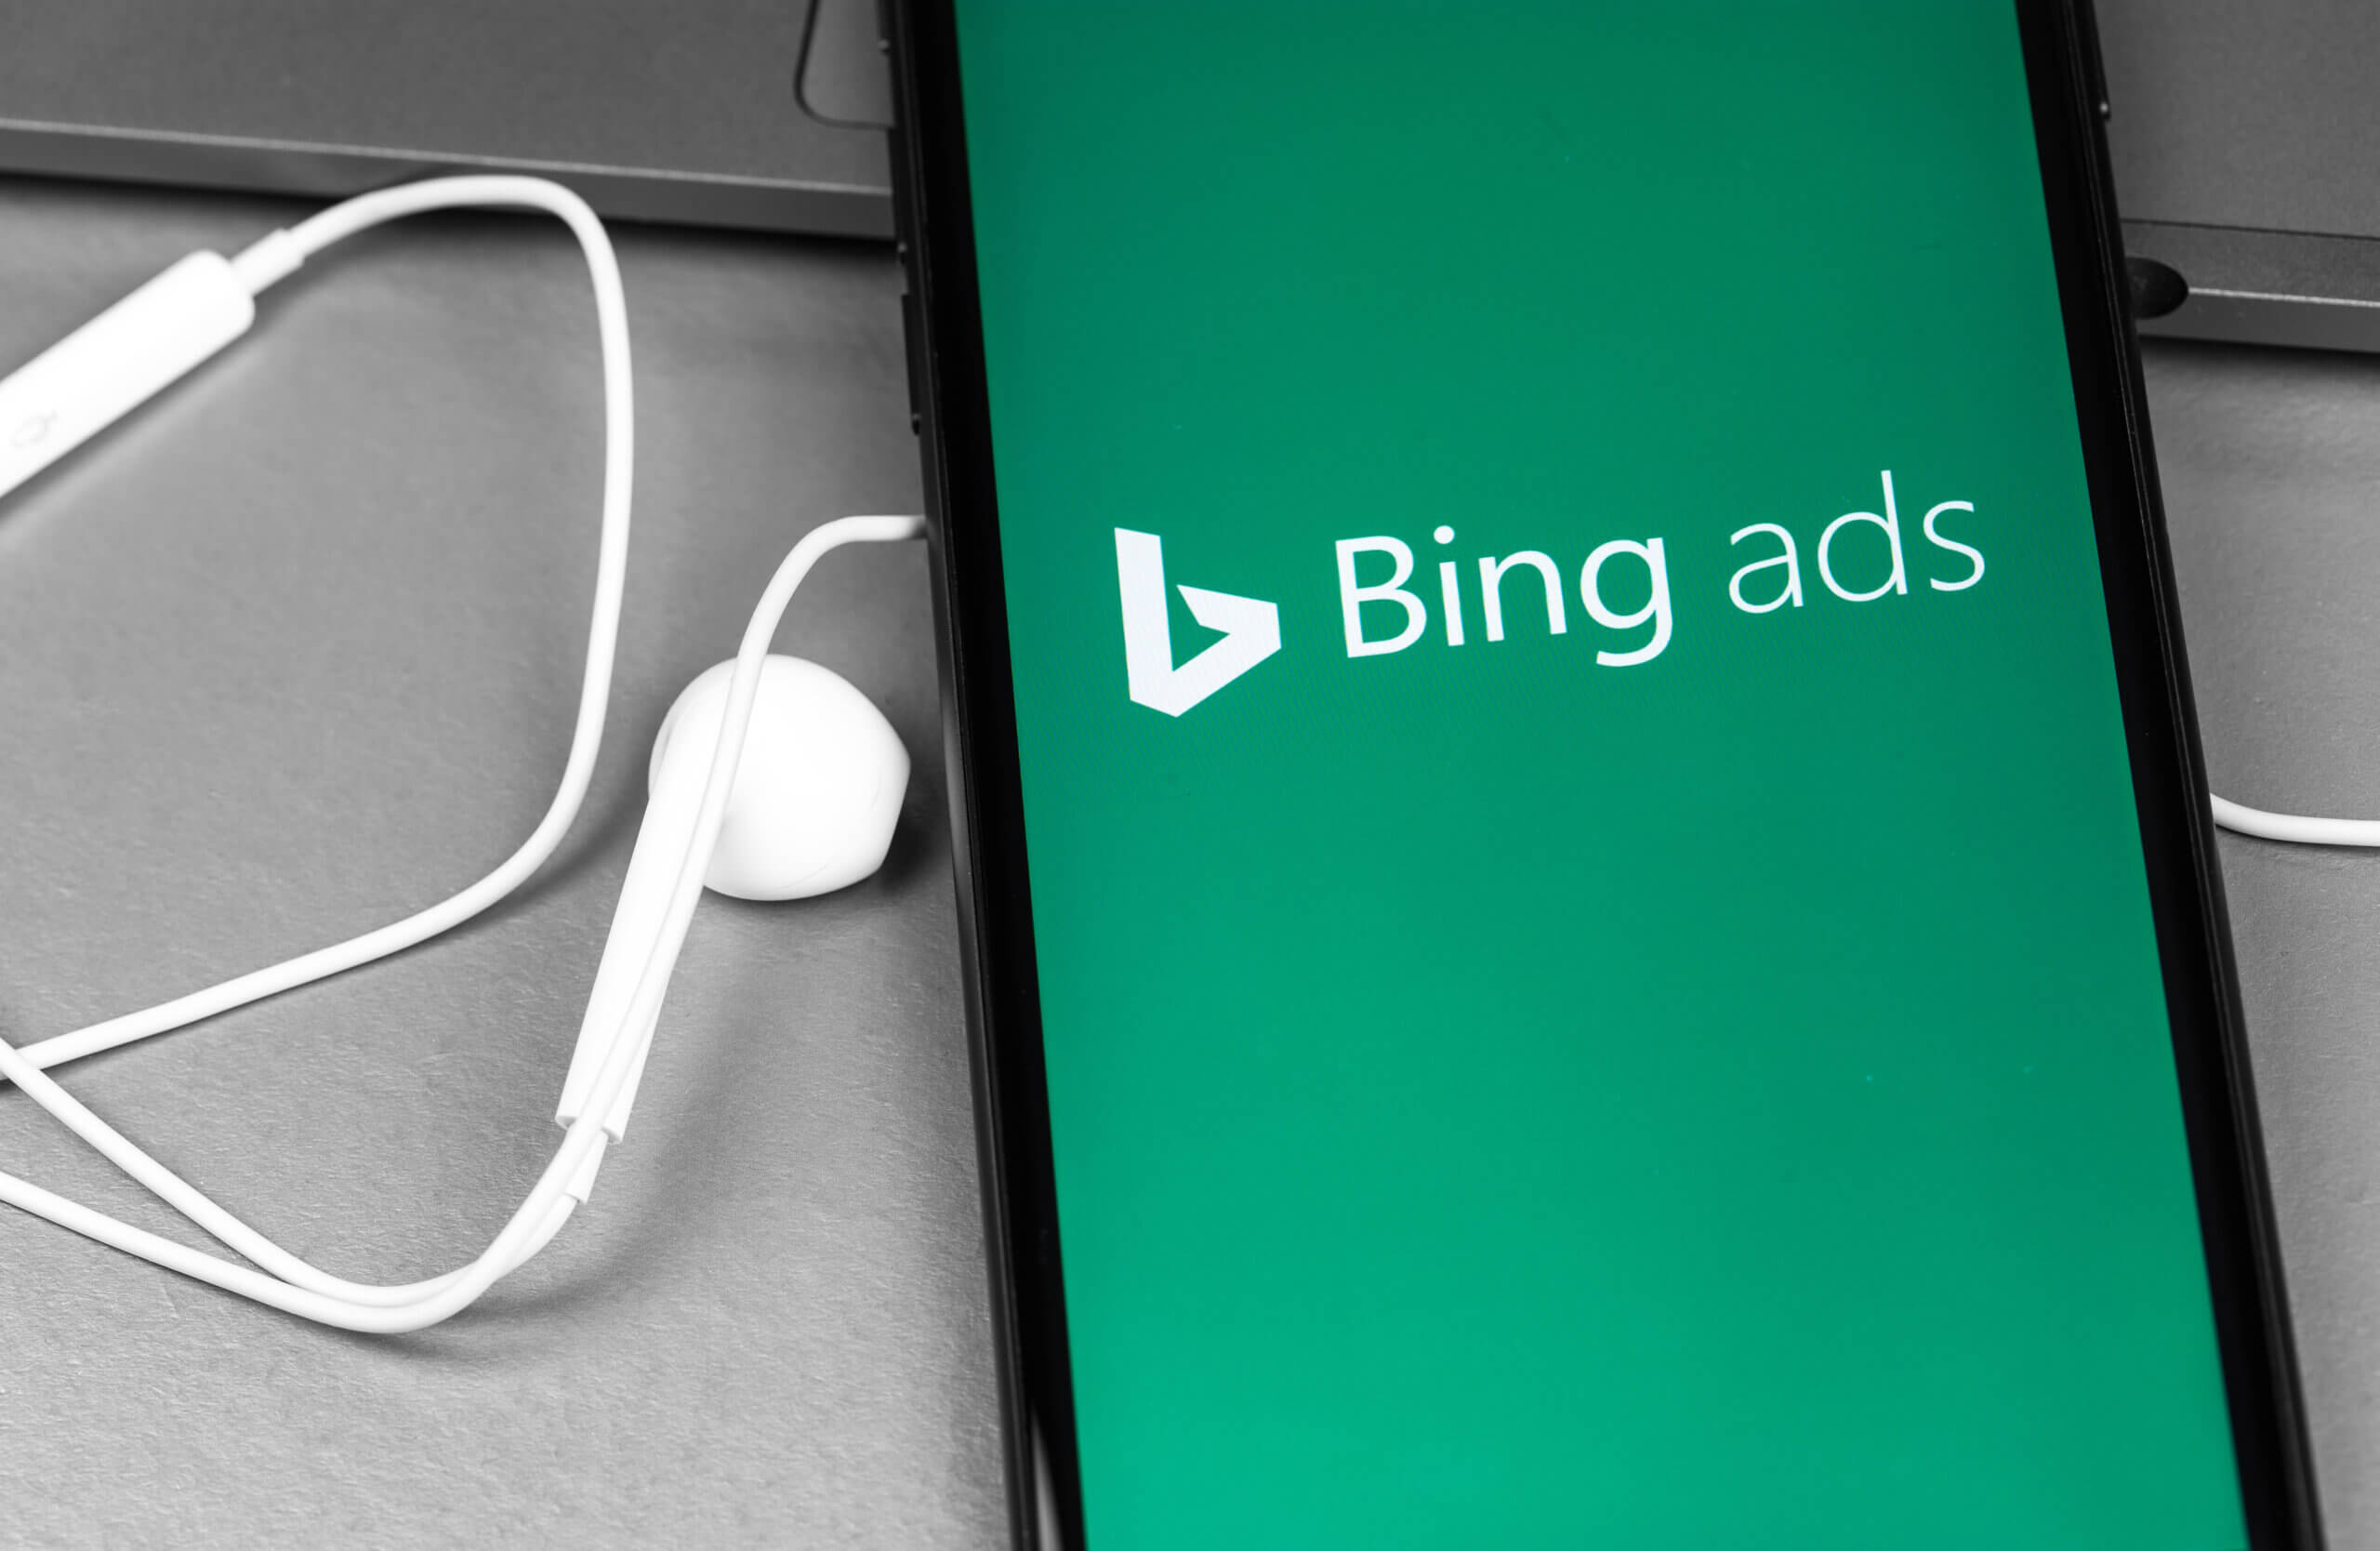 Bing Ads app logo on the screen smartphone with headphones Earpods closeup. Microsoft Advertising is a service that provides pay-per-click advertising like Bing. Moscow, Russia - August 11, 2020